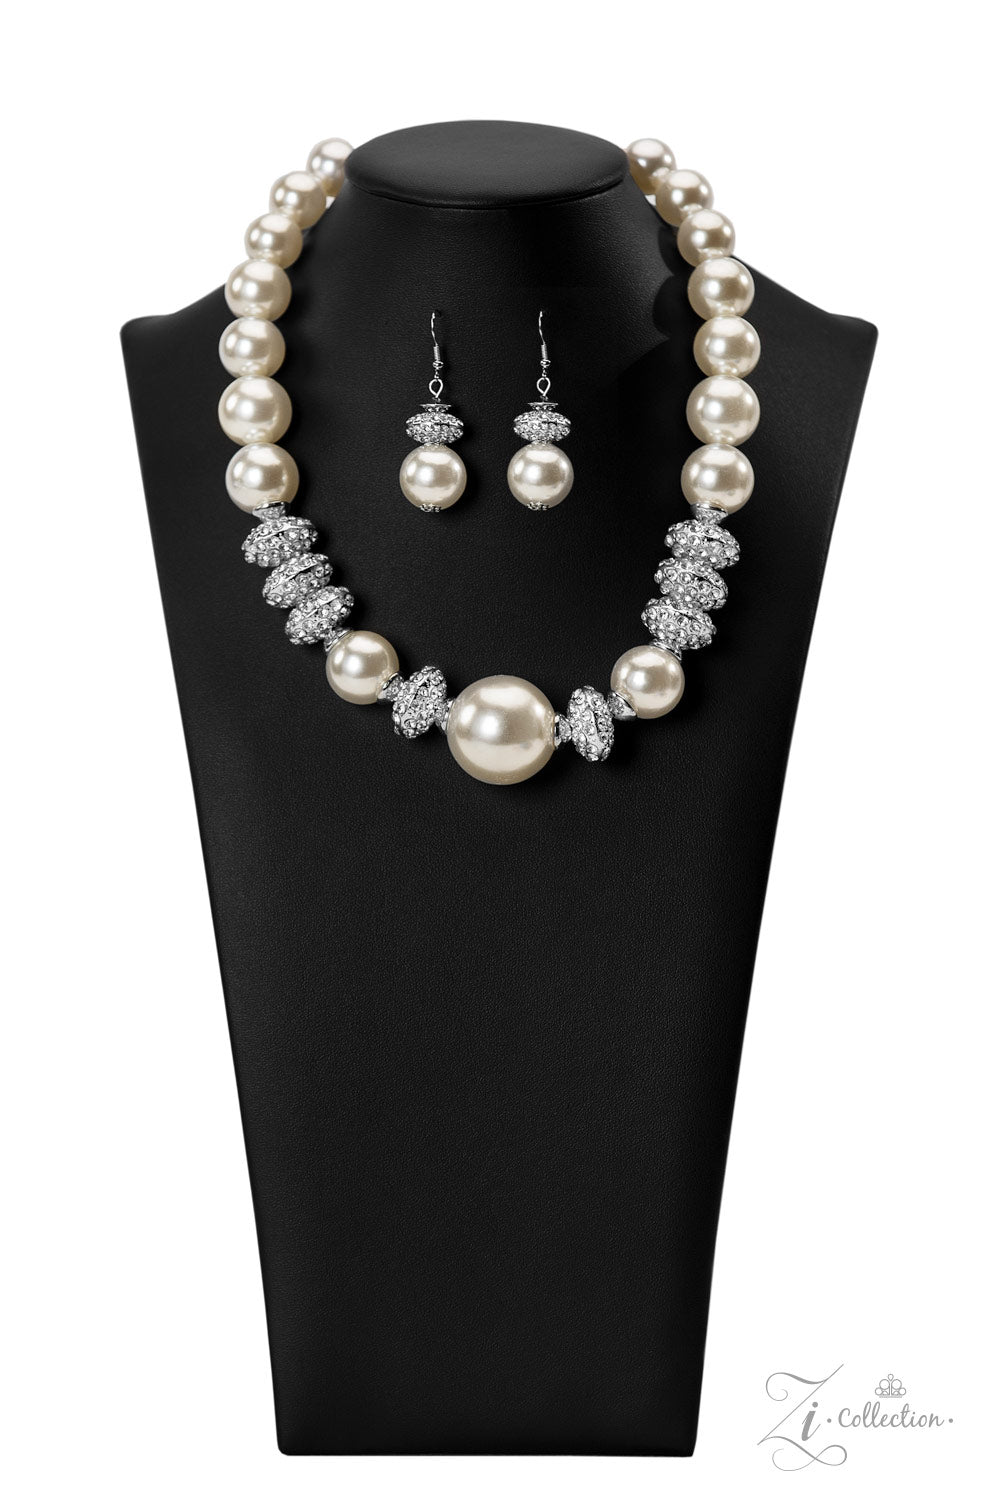 Paparazzi Accessories Noble Exaggerated white pearls gradually increase in size as they fall along the neckline, leading to a prominent centerpiece. The refined palette is complemented by shimmery silver accents, interspersed throughout the polished pearl